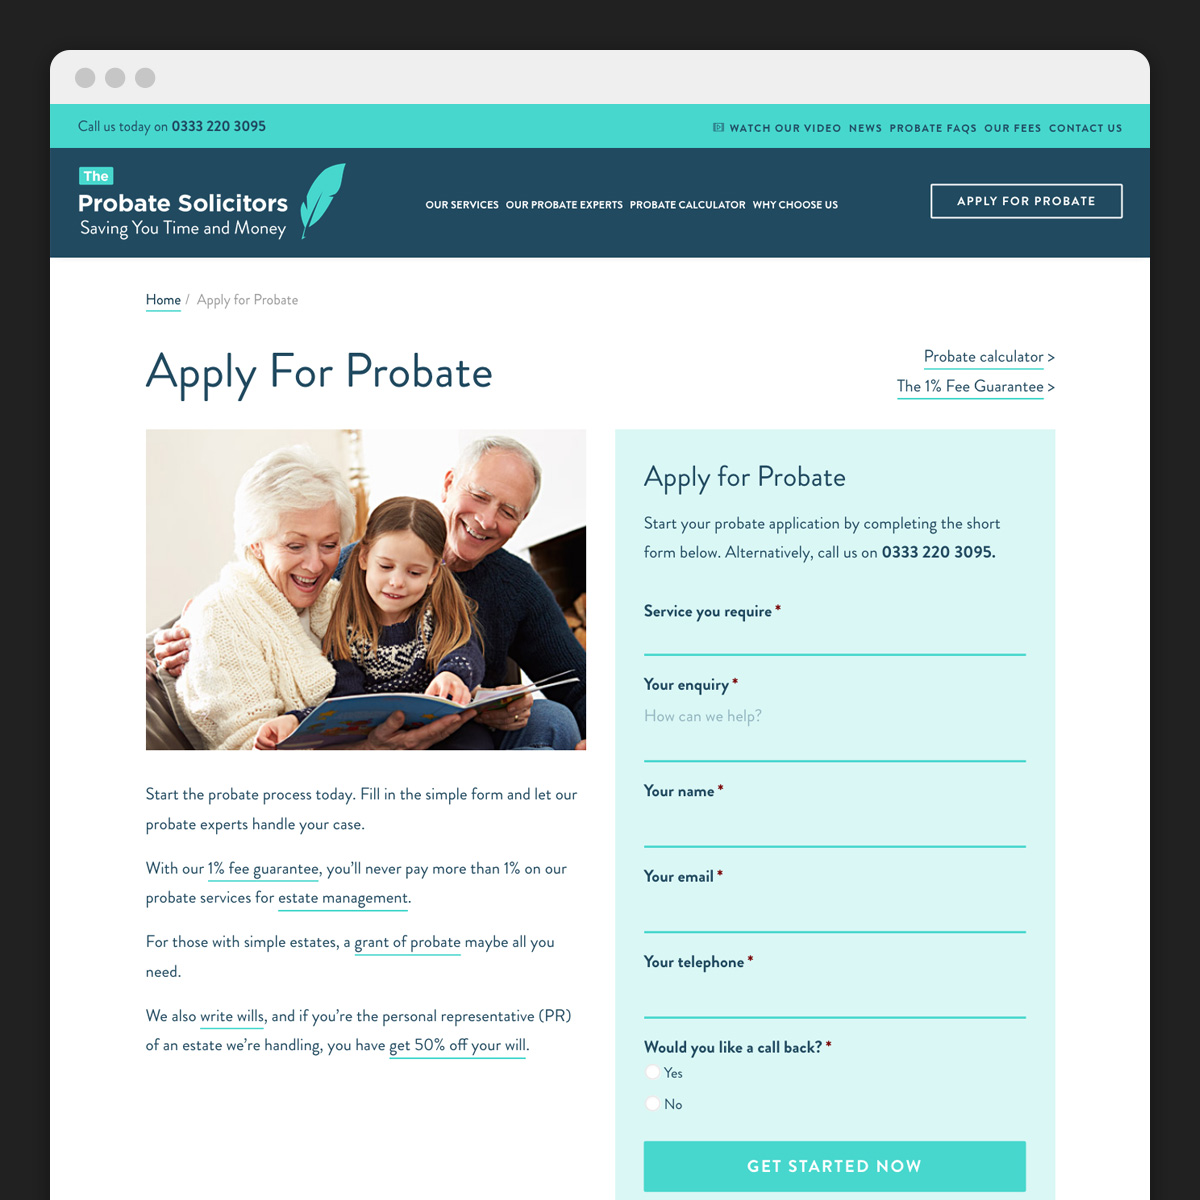 The Probate Solicitors Apply For Probate